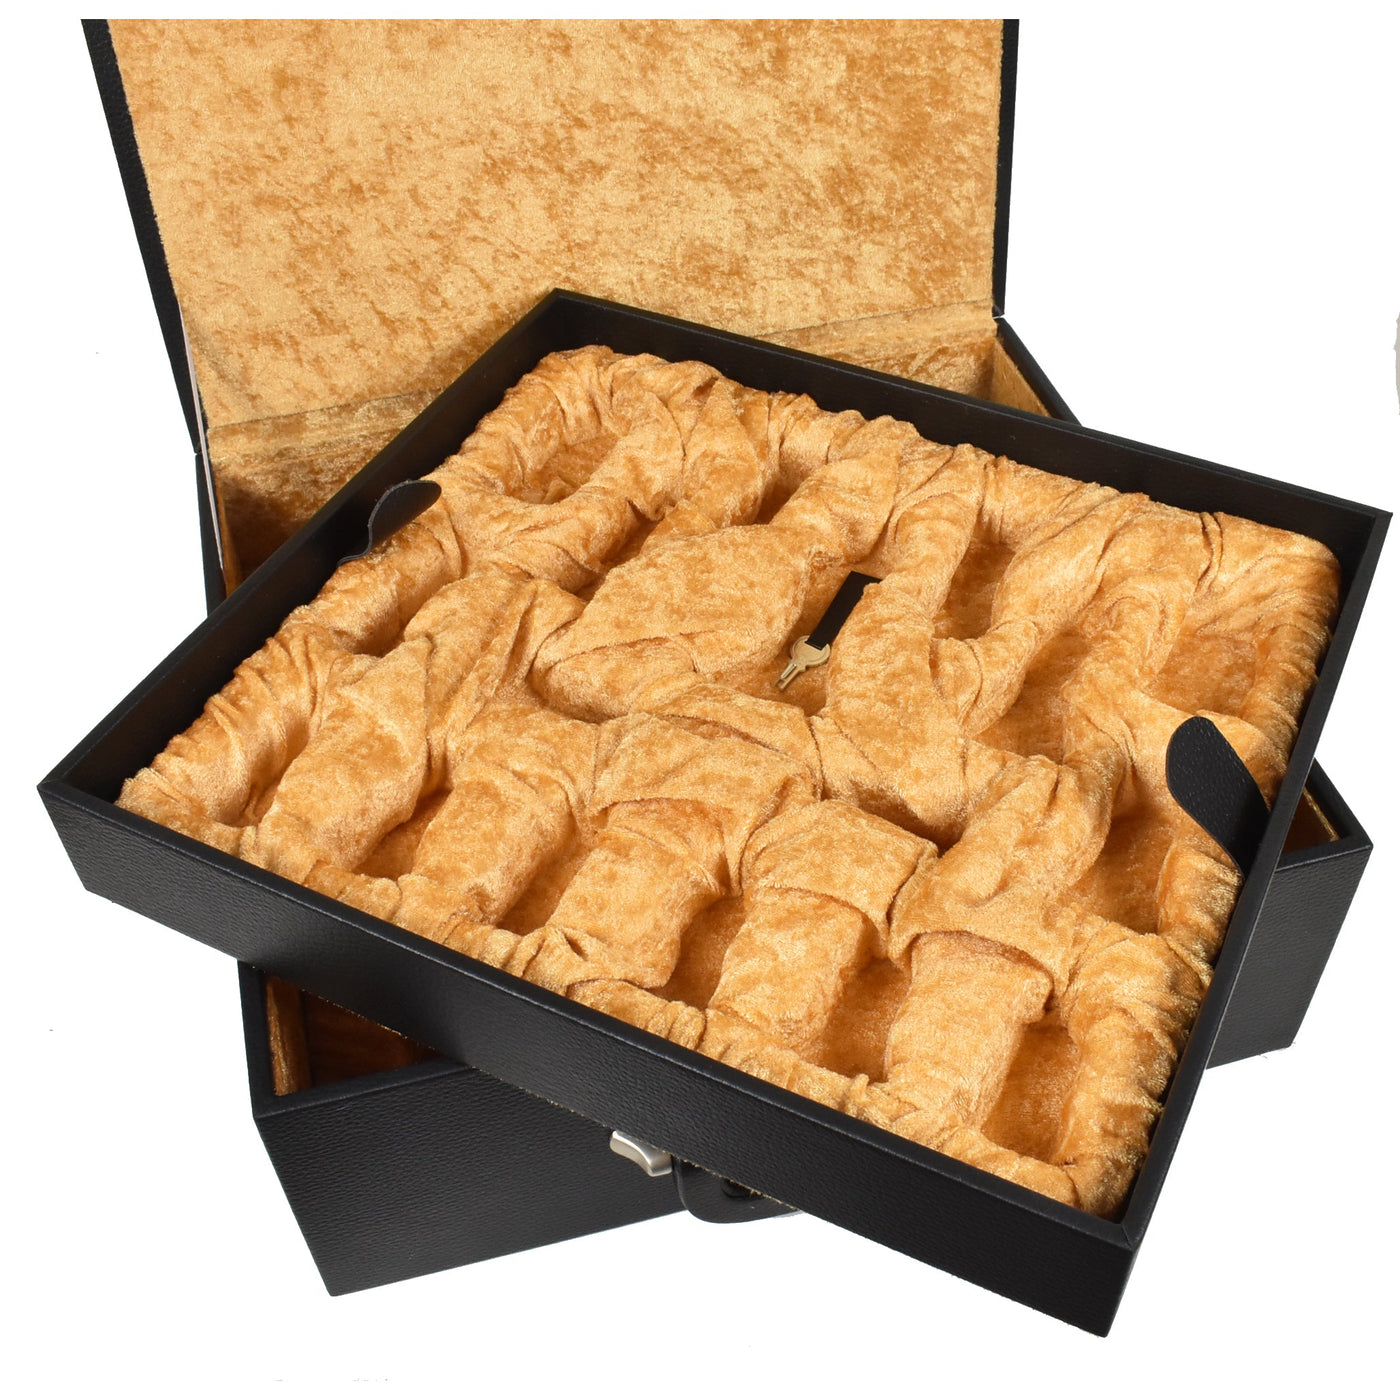 4.2" American Staunton Luxury Budrose Wood Chess Pieces with 21" Bud Rosewood & Maple Wood Luxury Chessboard and Leatherette Coffer Storage Box